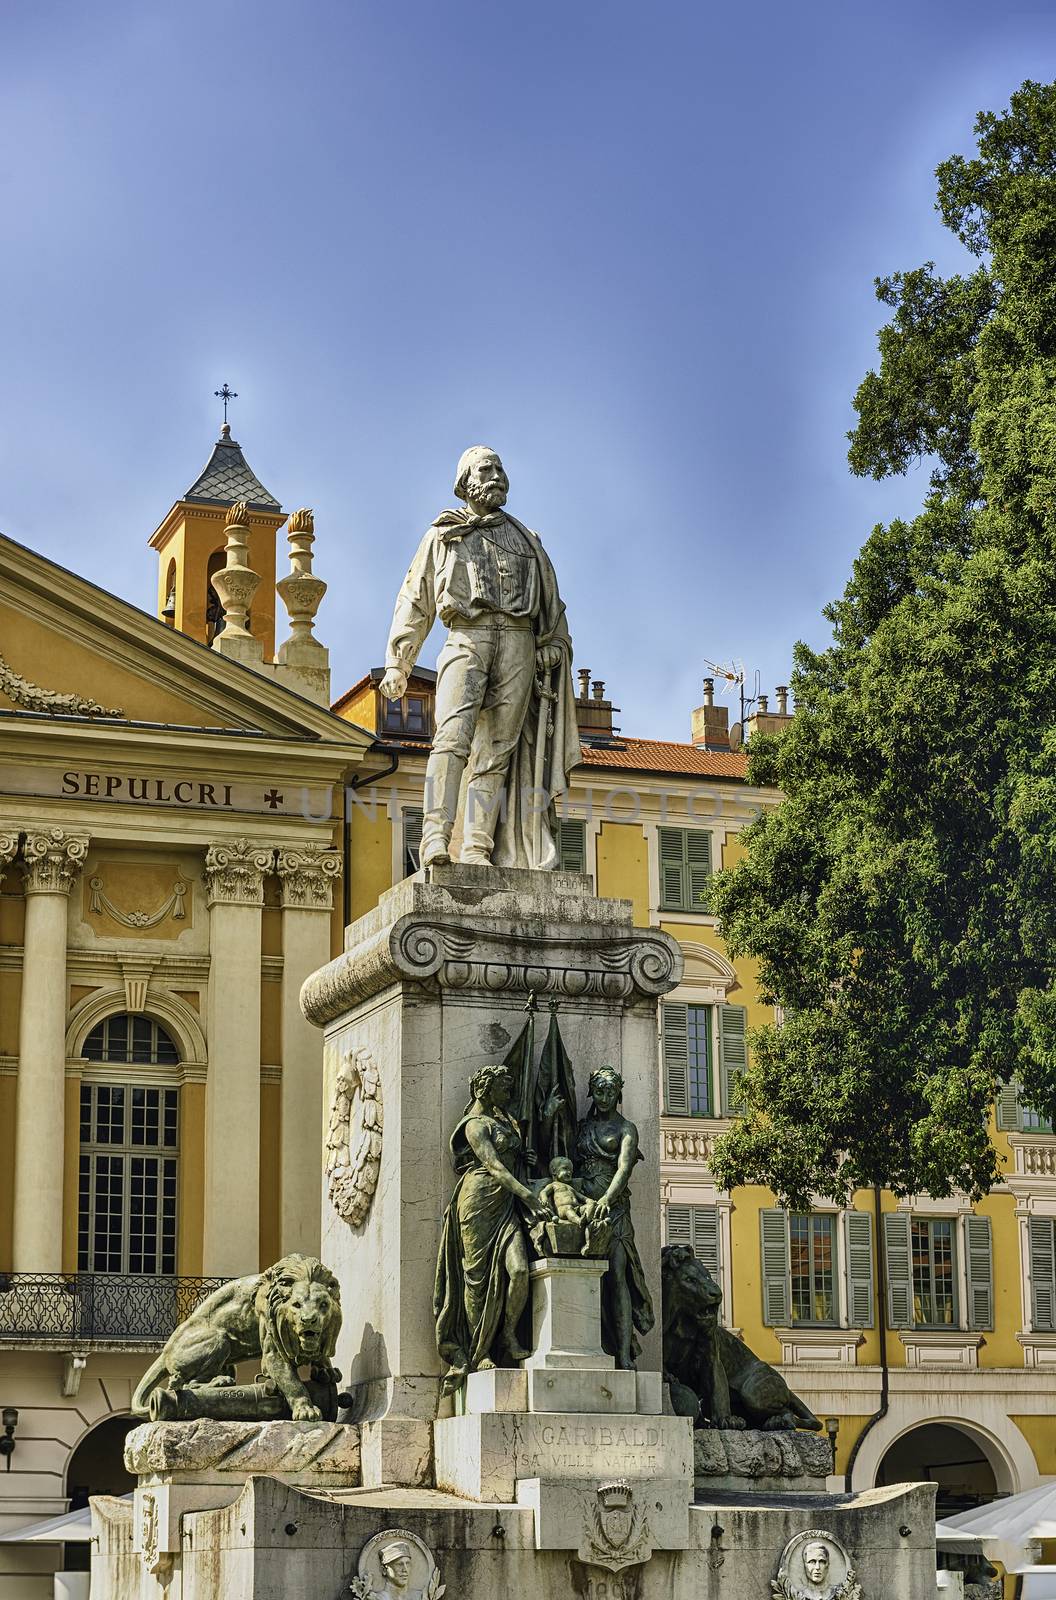 Statue of Garibaldi, in the square of the same name, Nice, Cote d'Azur, France. Giuseppe Garibaldi, born in Nice in 1807, was a hero of the Italian unification